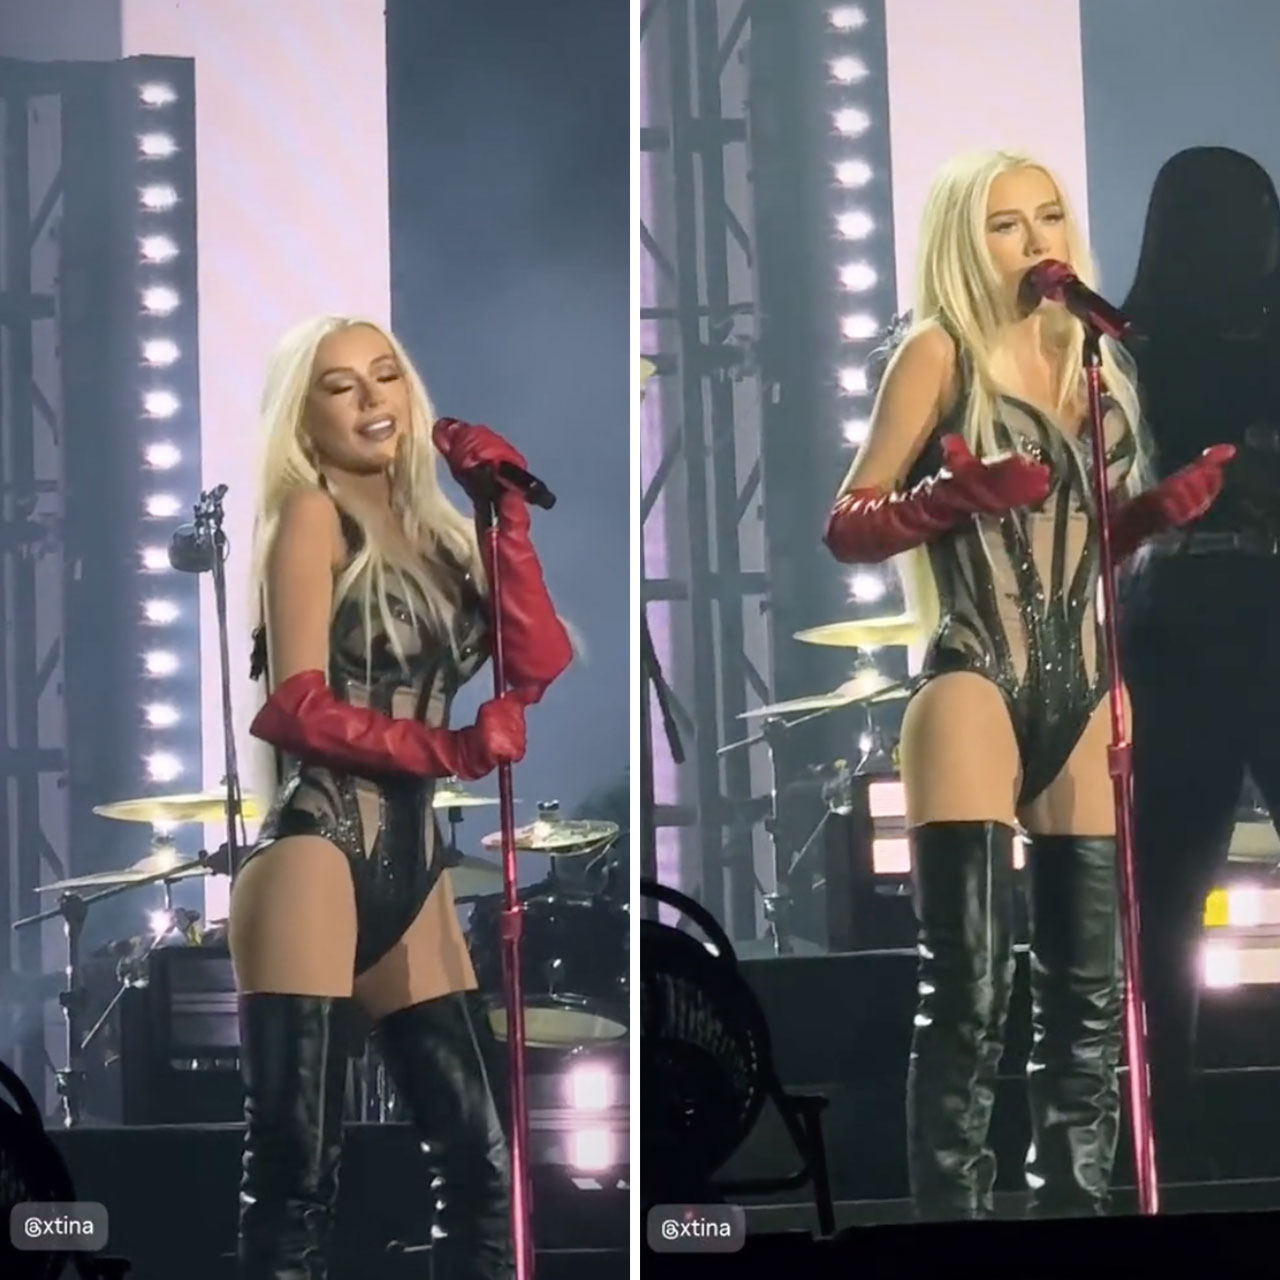 Christina Aguilera performing What a Girl Wants in Mexico City